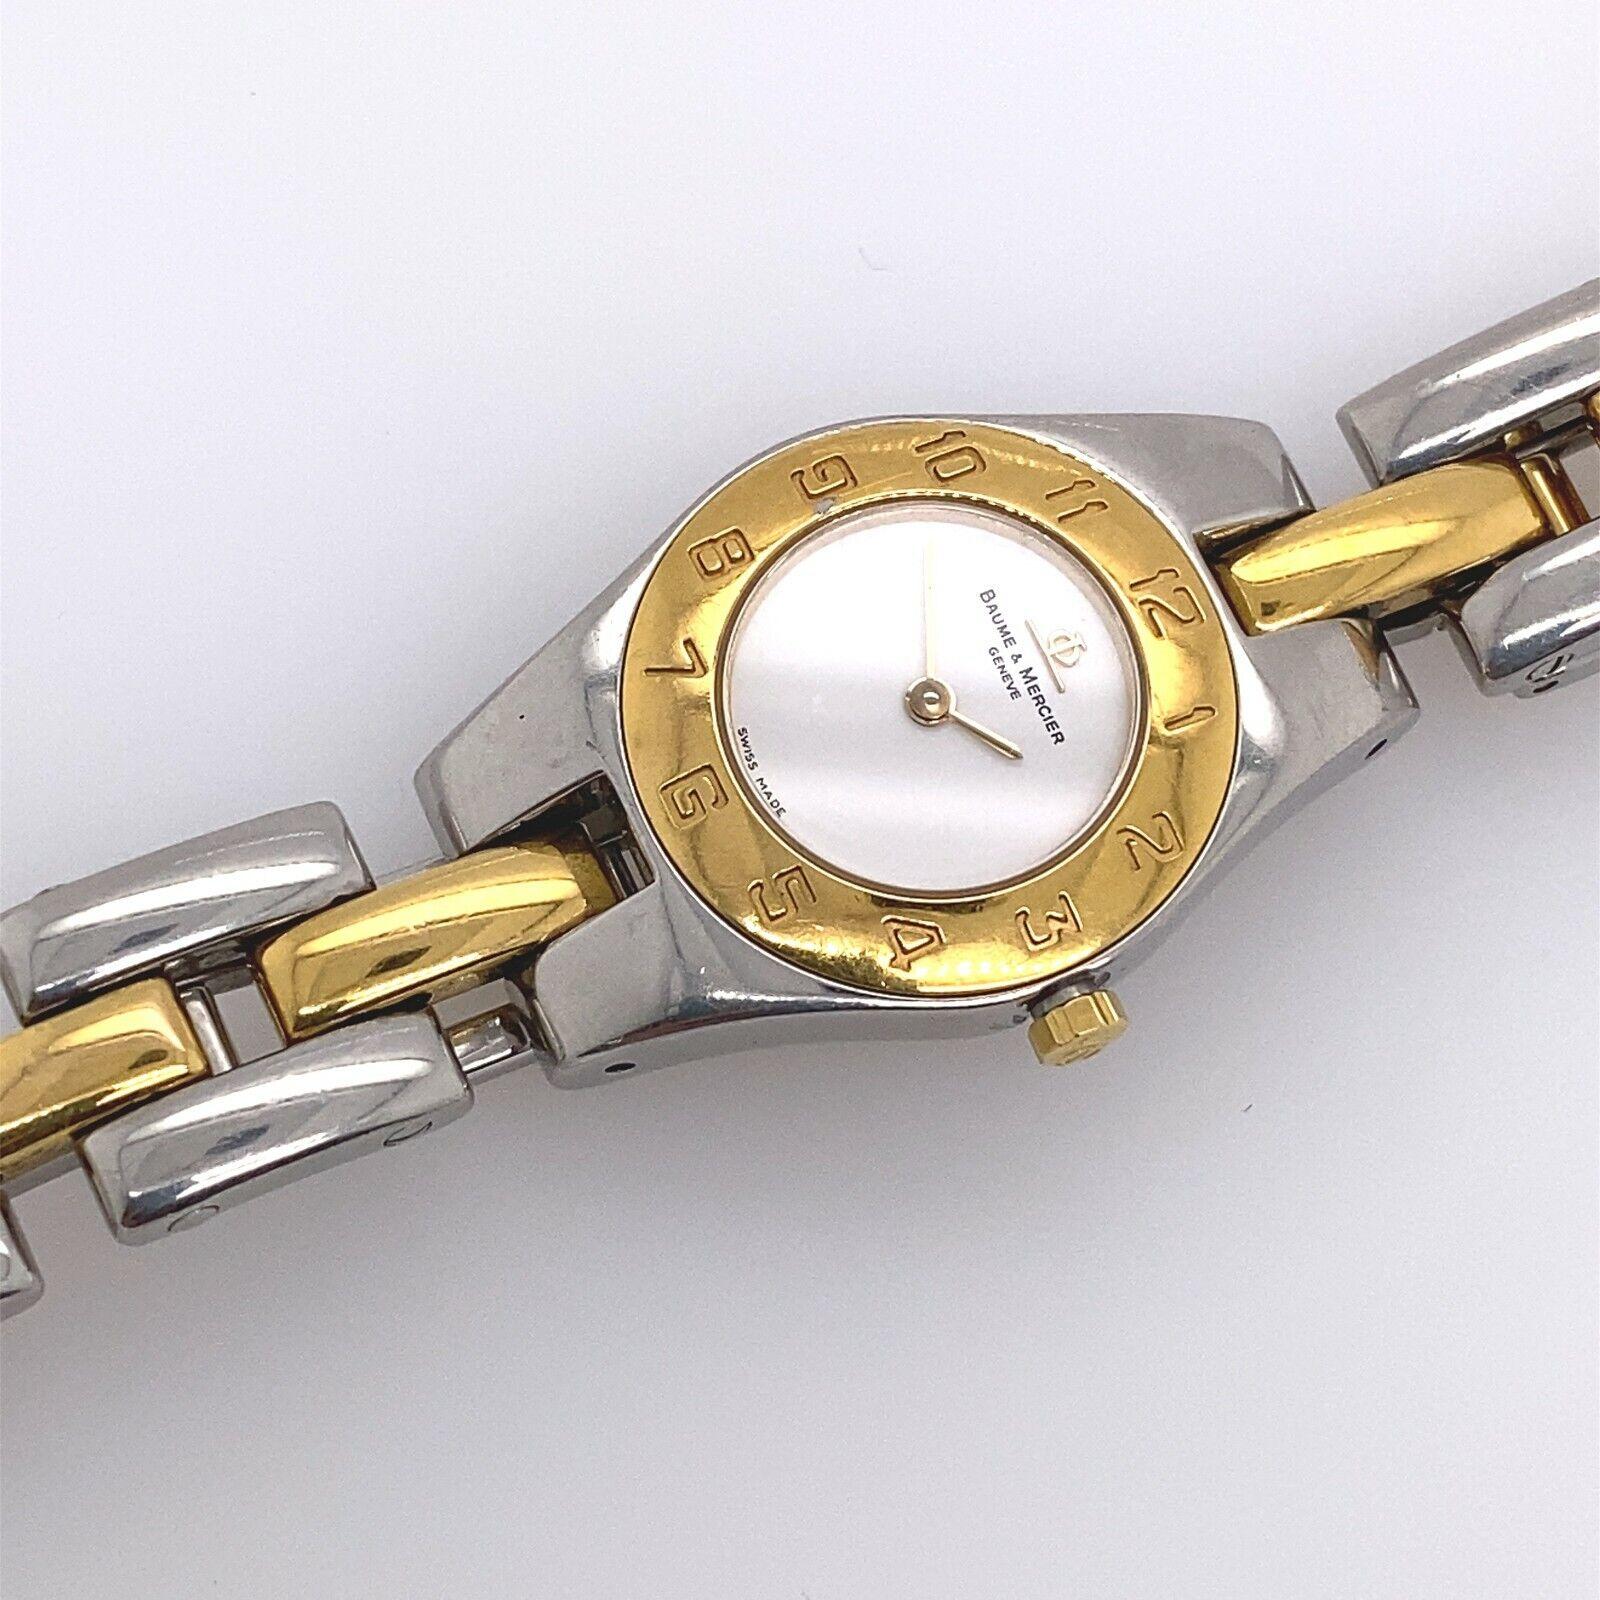 Baume & Mercier Linea 25mm Steel & Gold Ladies Quartz Watch

For a Small Wrist Only Fully Serviced With almost 200 years of watch making history behind them, Baume & Mercier is a true icon of the Swiss watch making industry. Baume & Mercier have